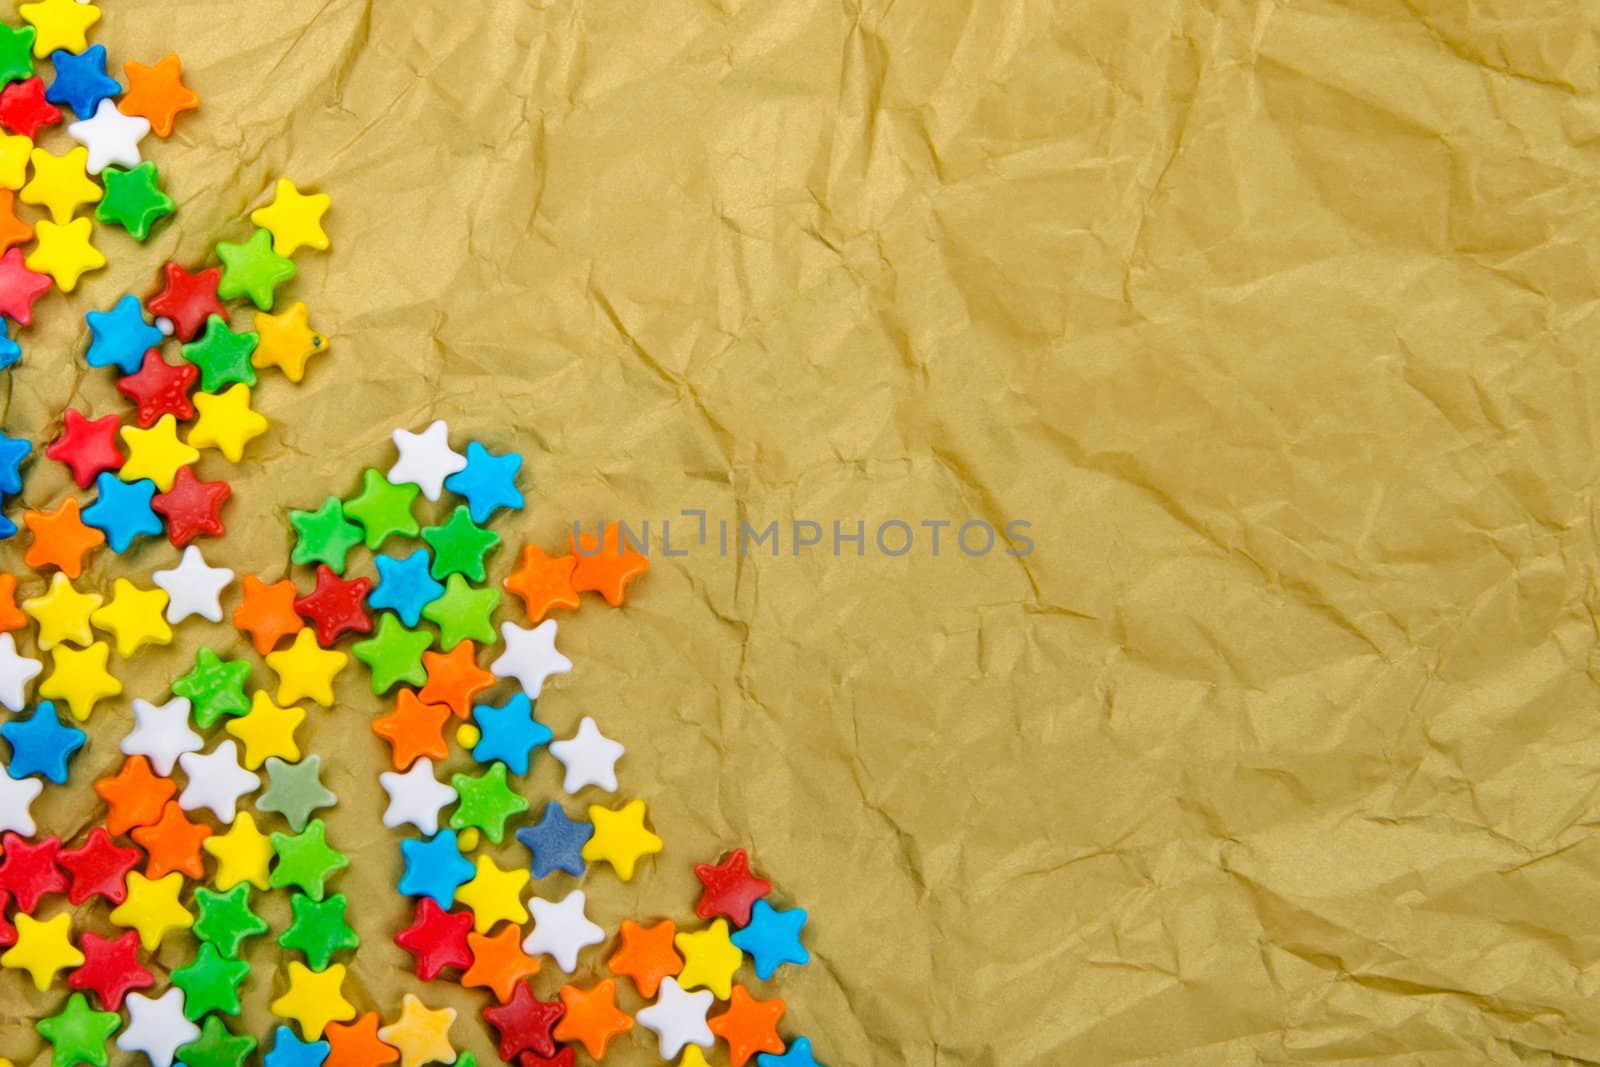 Multicolored stars on a background of crumpled paper